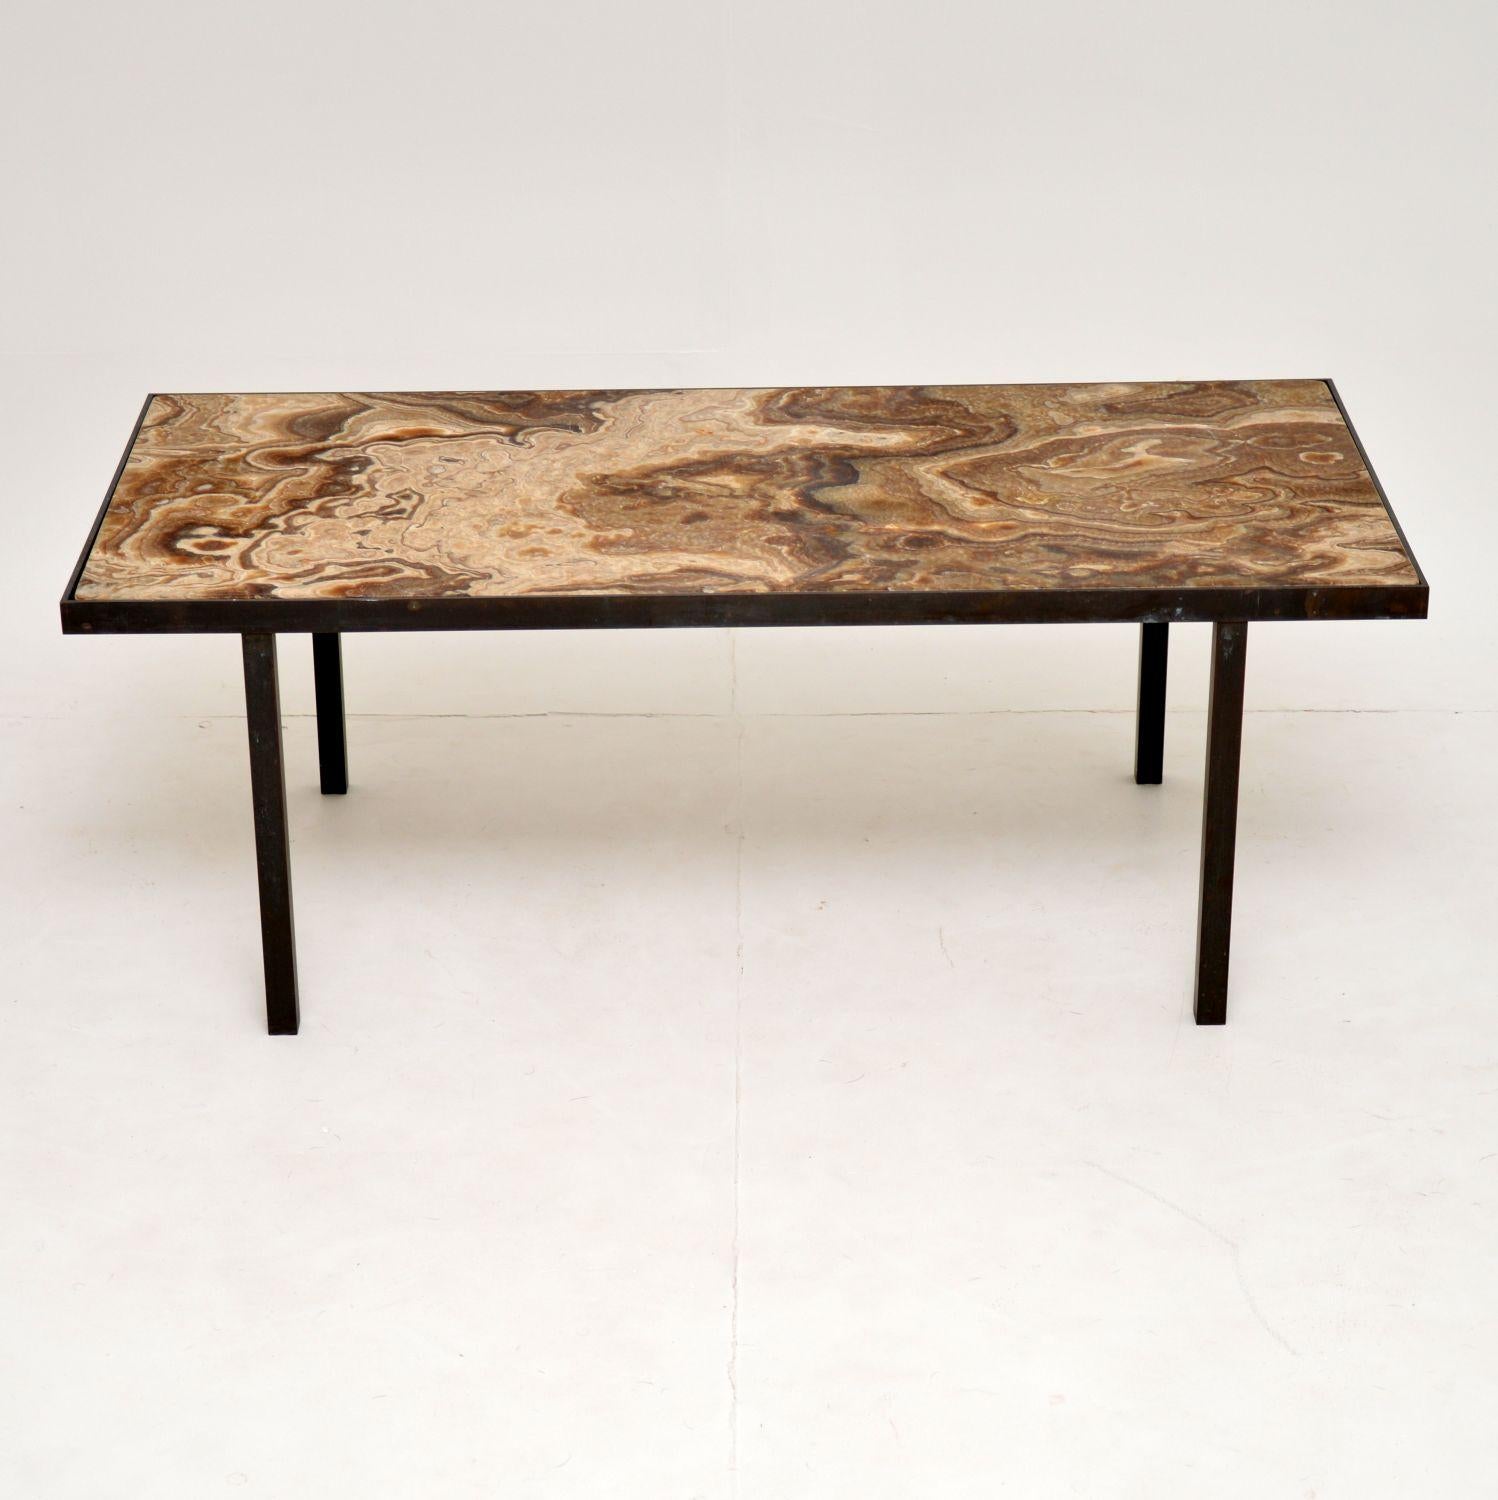 A beautiful vintage coffee table dating from the 1950s-1960s. This has an absolutely stunning inset marble top, we’ve never seen marble patterns that look this beautiful before! The frame is solid brass that has acquired a beautiful heavy patina